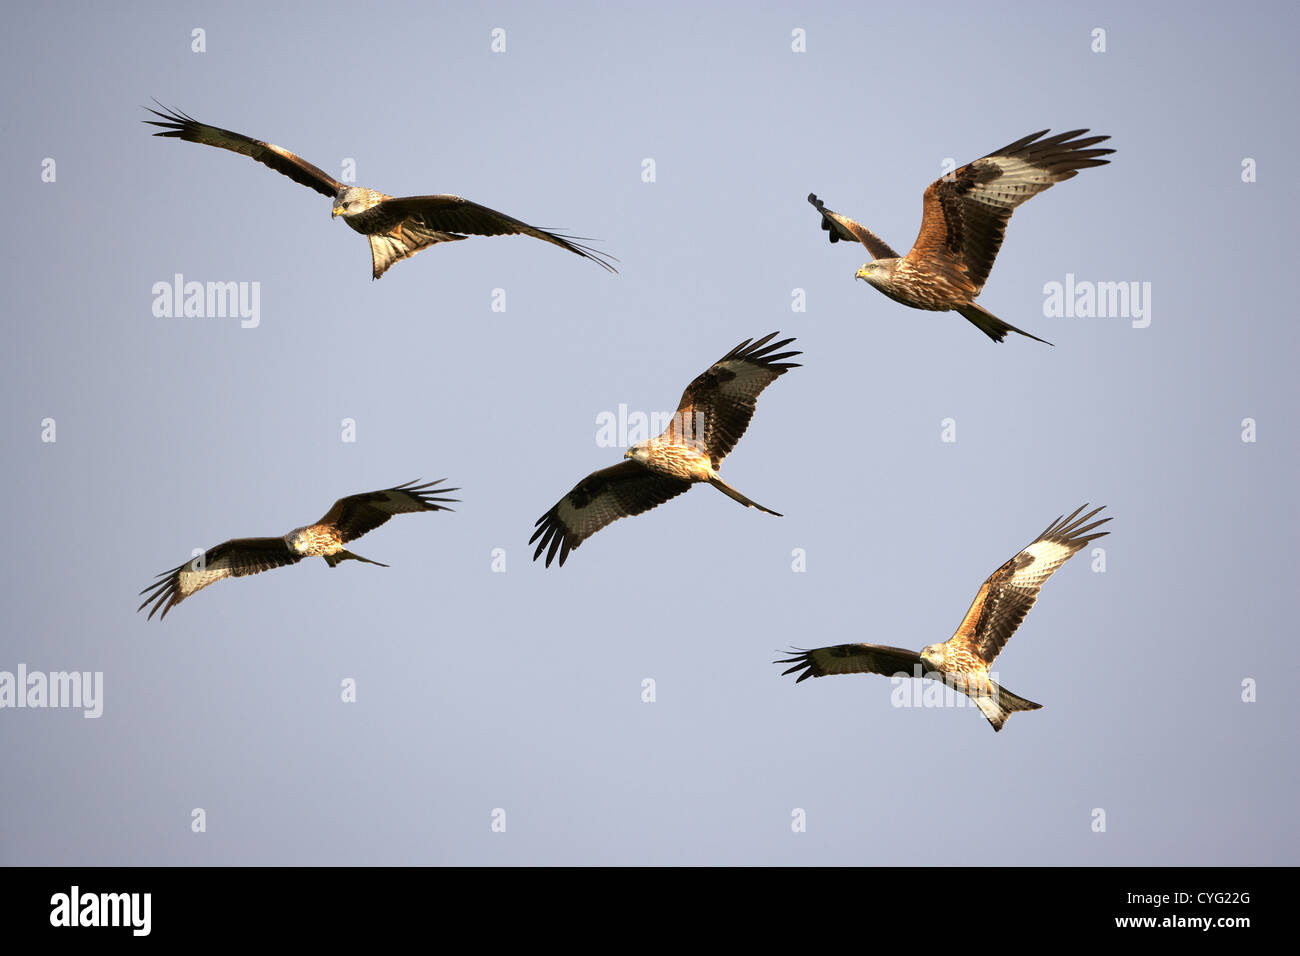 Montage of Red Kites, Llanddeusant, Brecon Beacons, Wales, UK Stock Photo